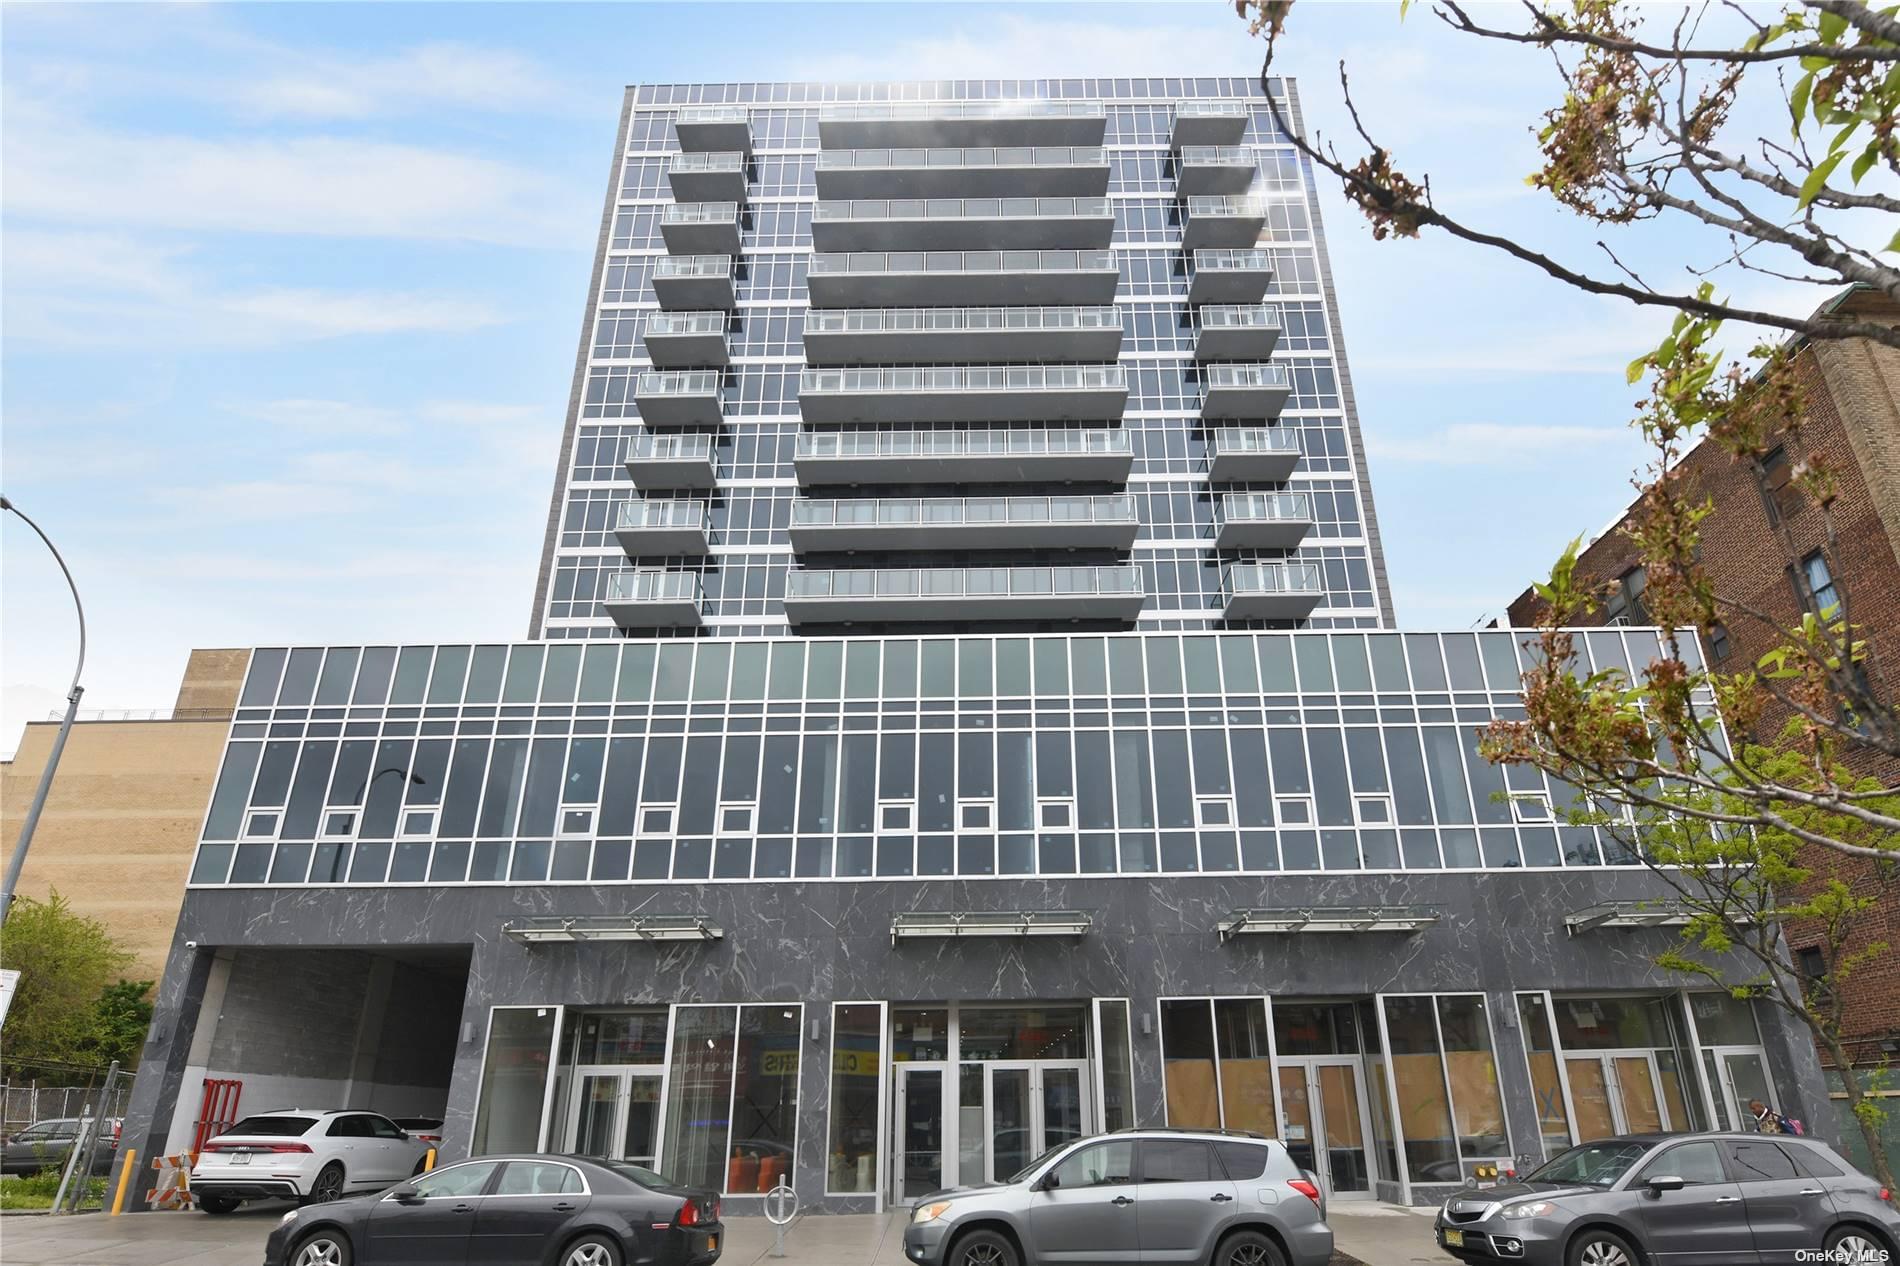 41-62 Bowne Street #14D in Queens, Flushing, NY 11355